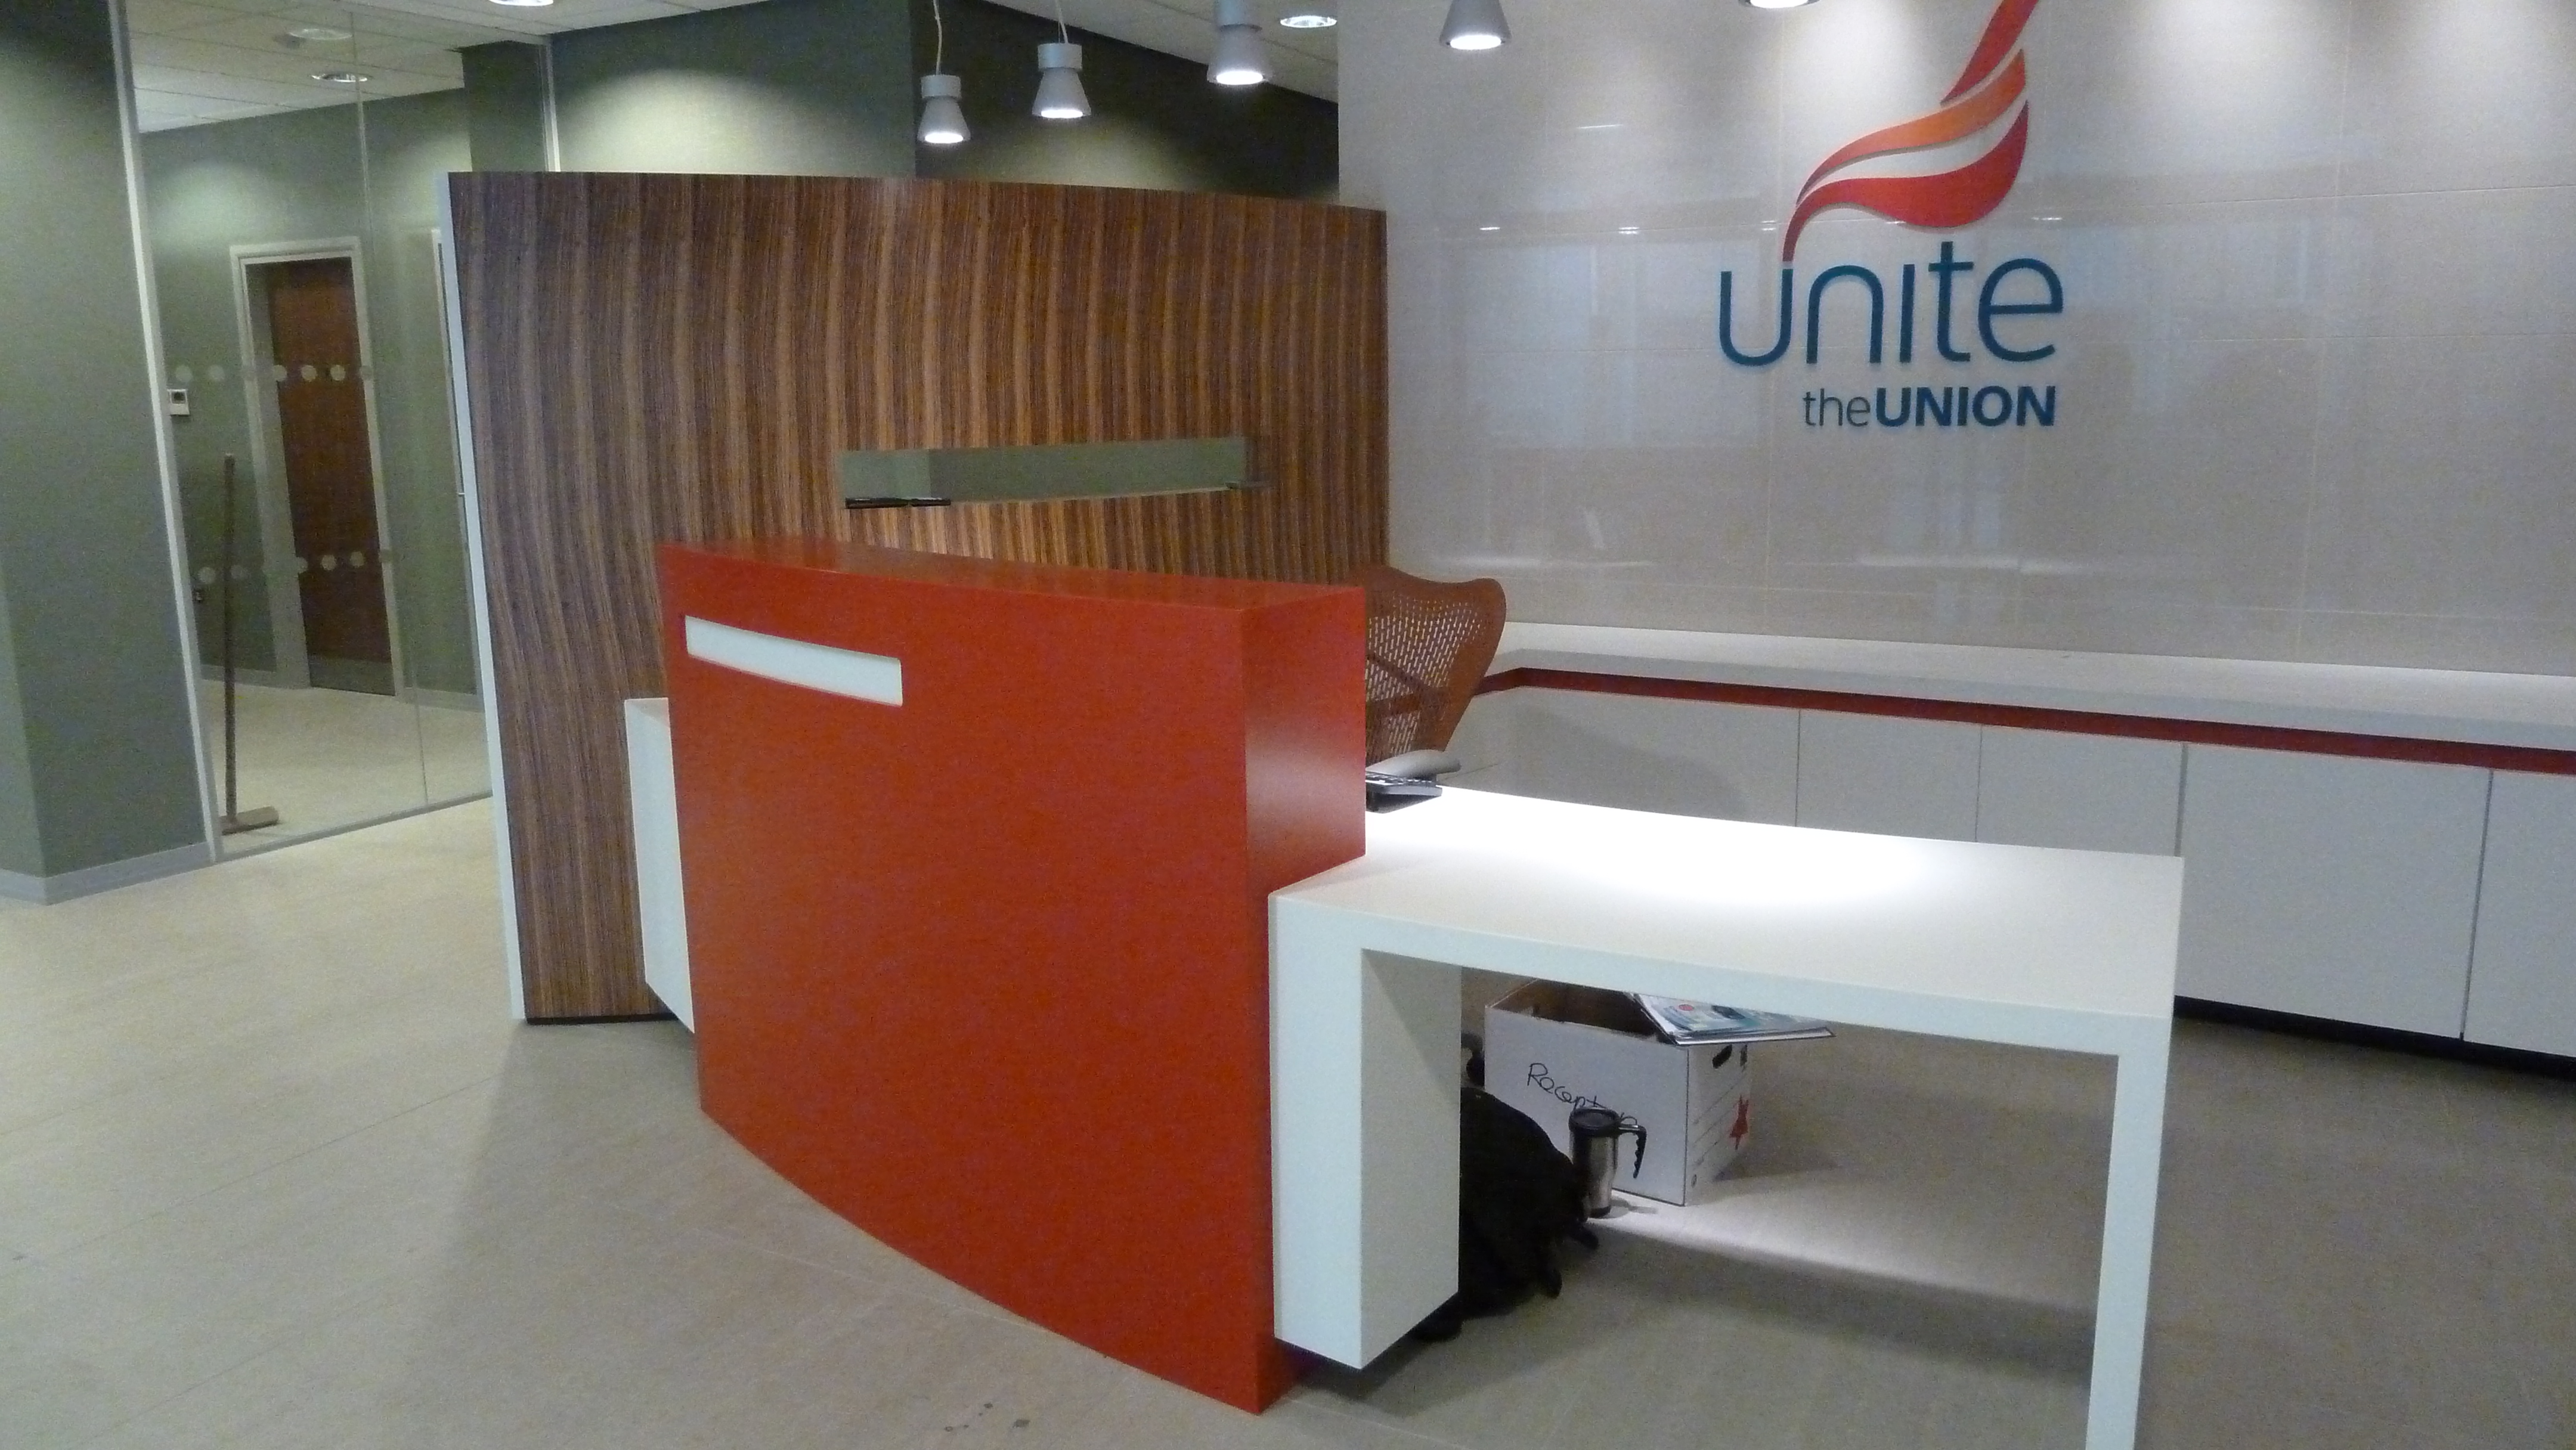 Unite the Union Reception Desk – Liverpool Manufactured from corian using hot and glacier white . Rear cupboards and worktops including doors manufactured from glacier white corian with hot (RED) inlay band. Curved laminated privacy screen wall made up from mdf and laminated in zebrano formica and a curved glass vision panel . 